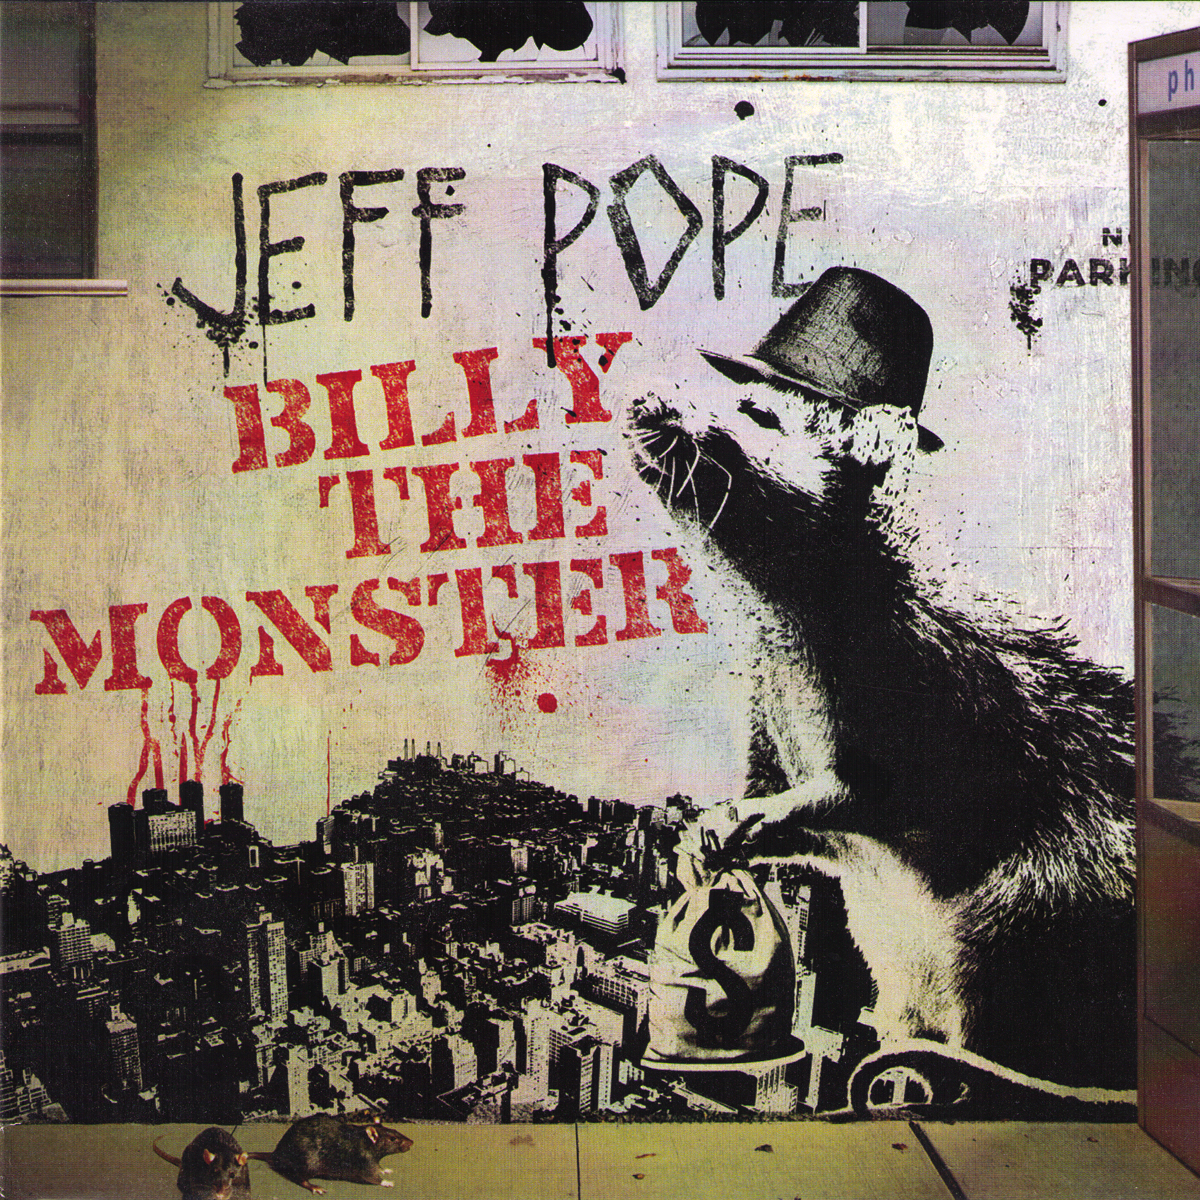 Jeff Pope- Billy The Monster 7" ~GHOST HIGHWAY RECORDINGS!